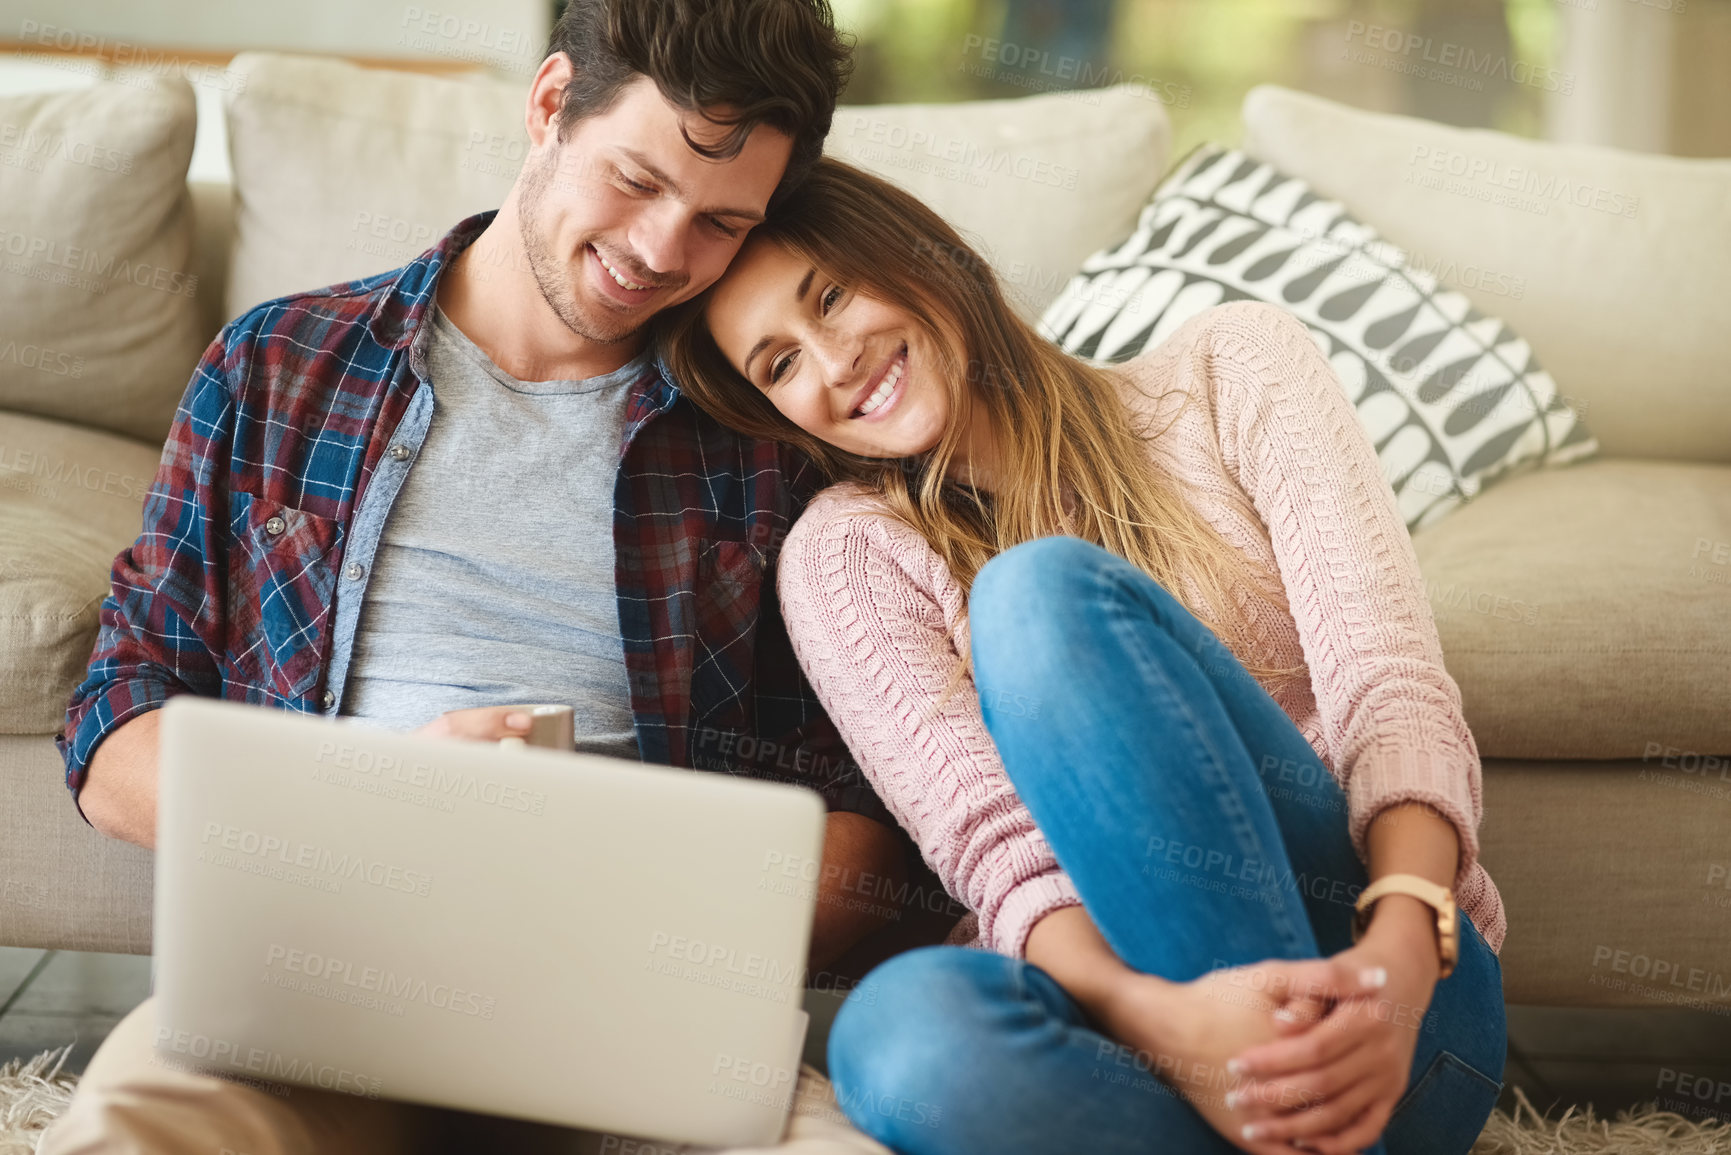 Buy stock photo Shot of a happy young couple using a laptop together while relaxing in their lounge at home